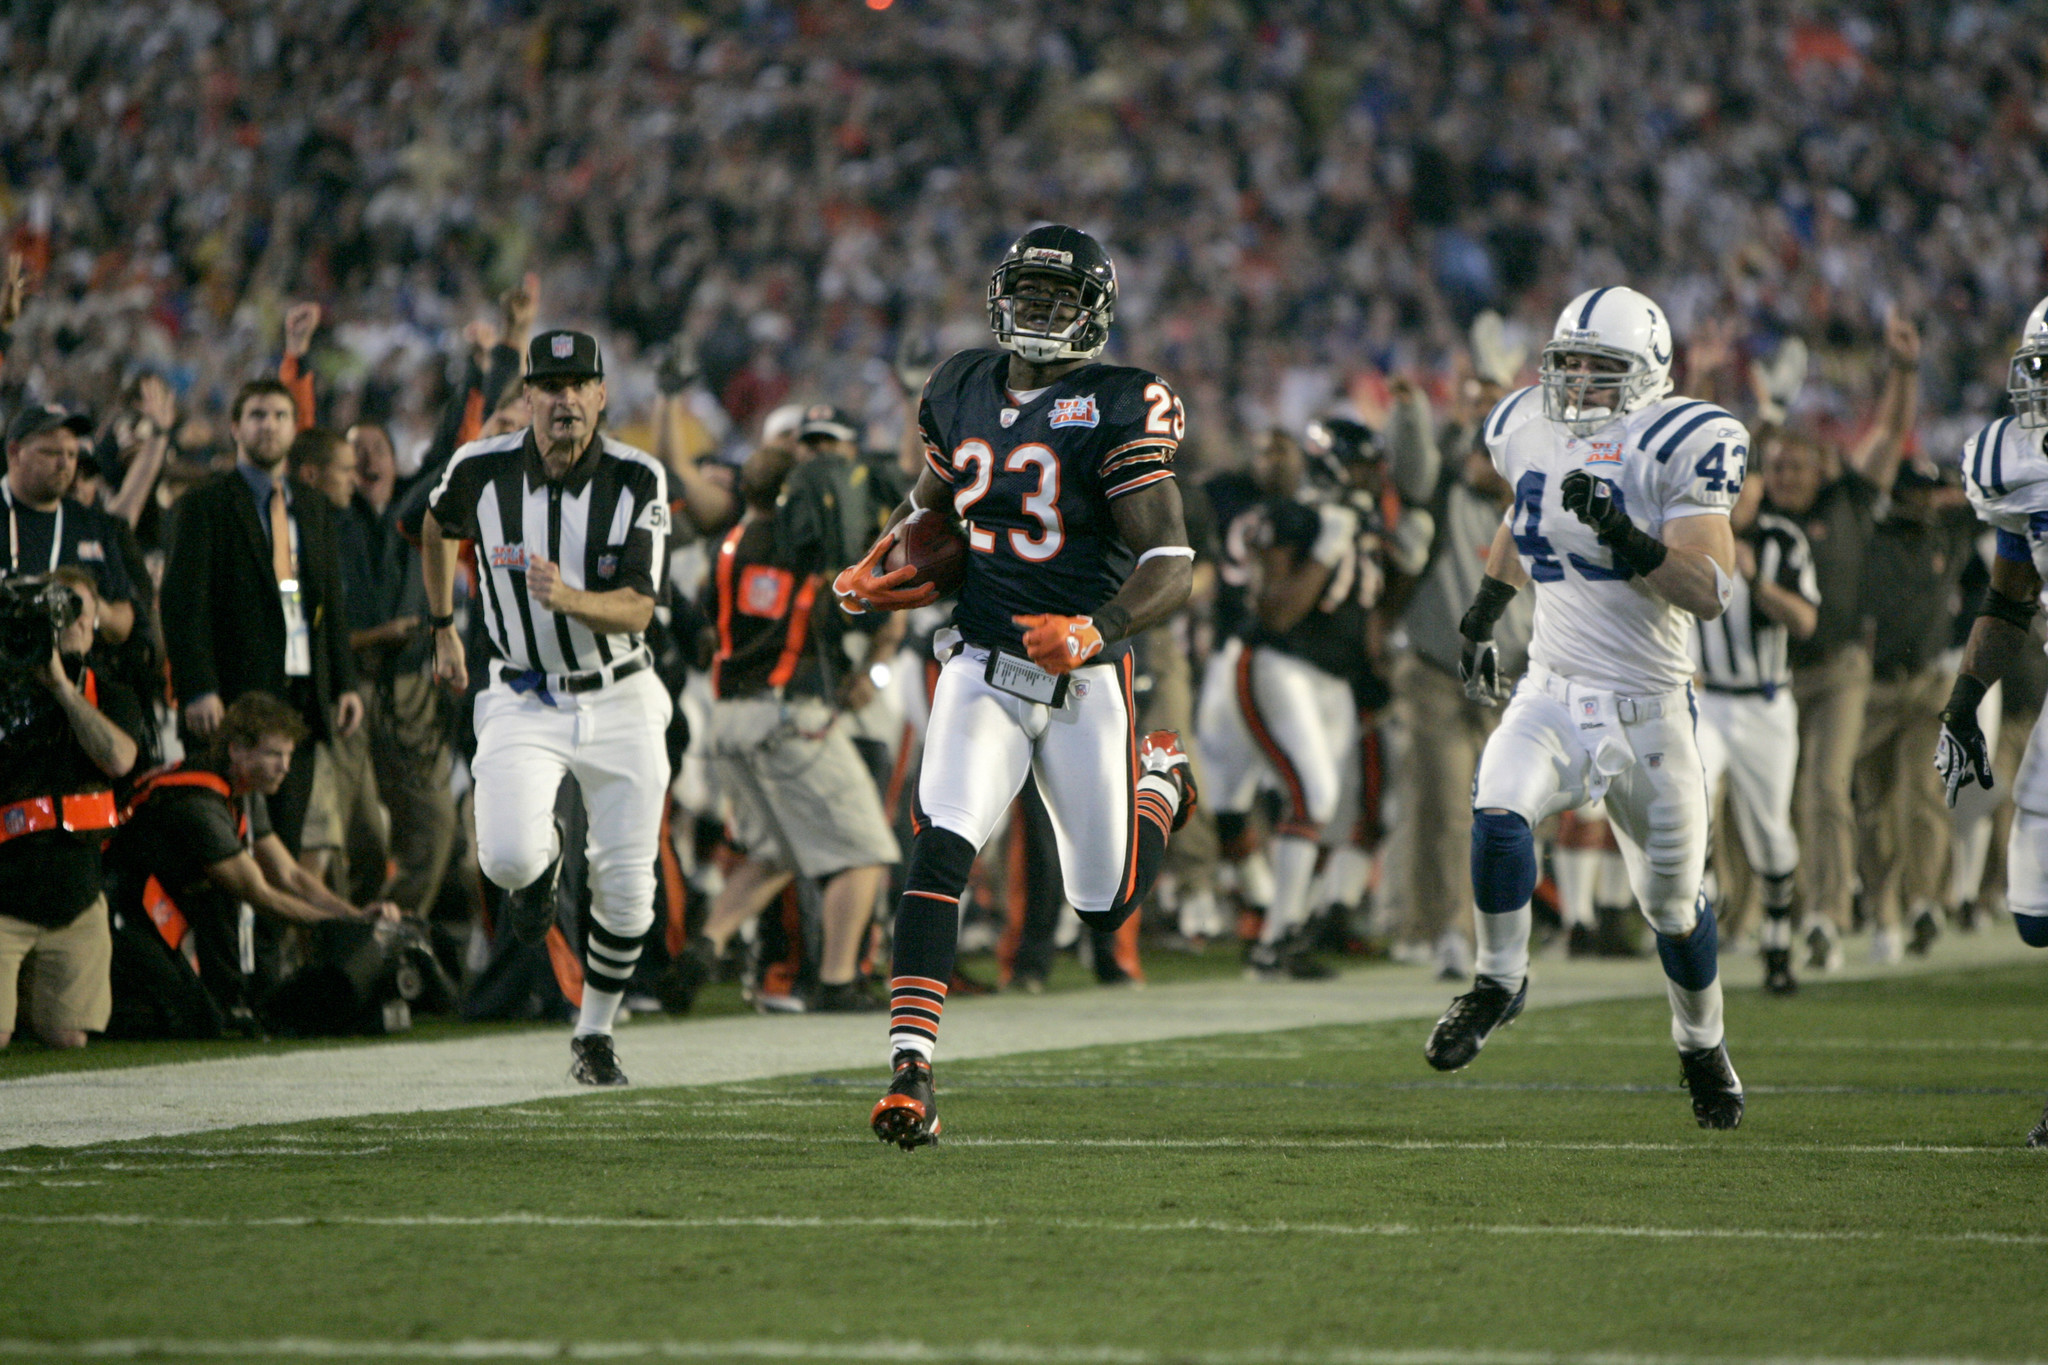 Former Bears kick returner Devin Hester has been elected to the